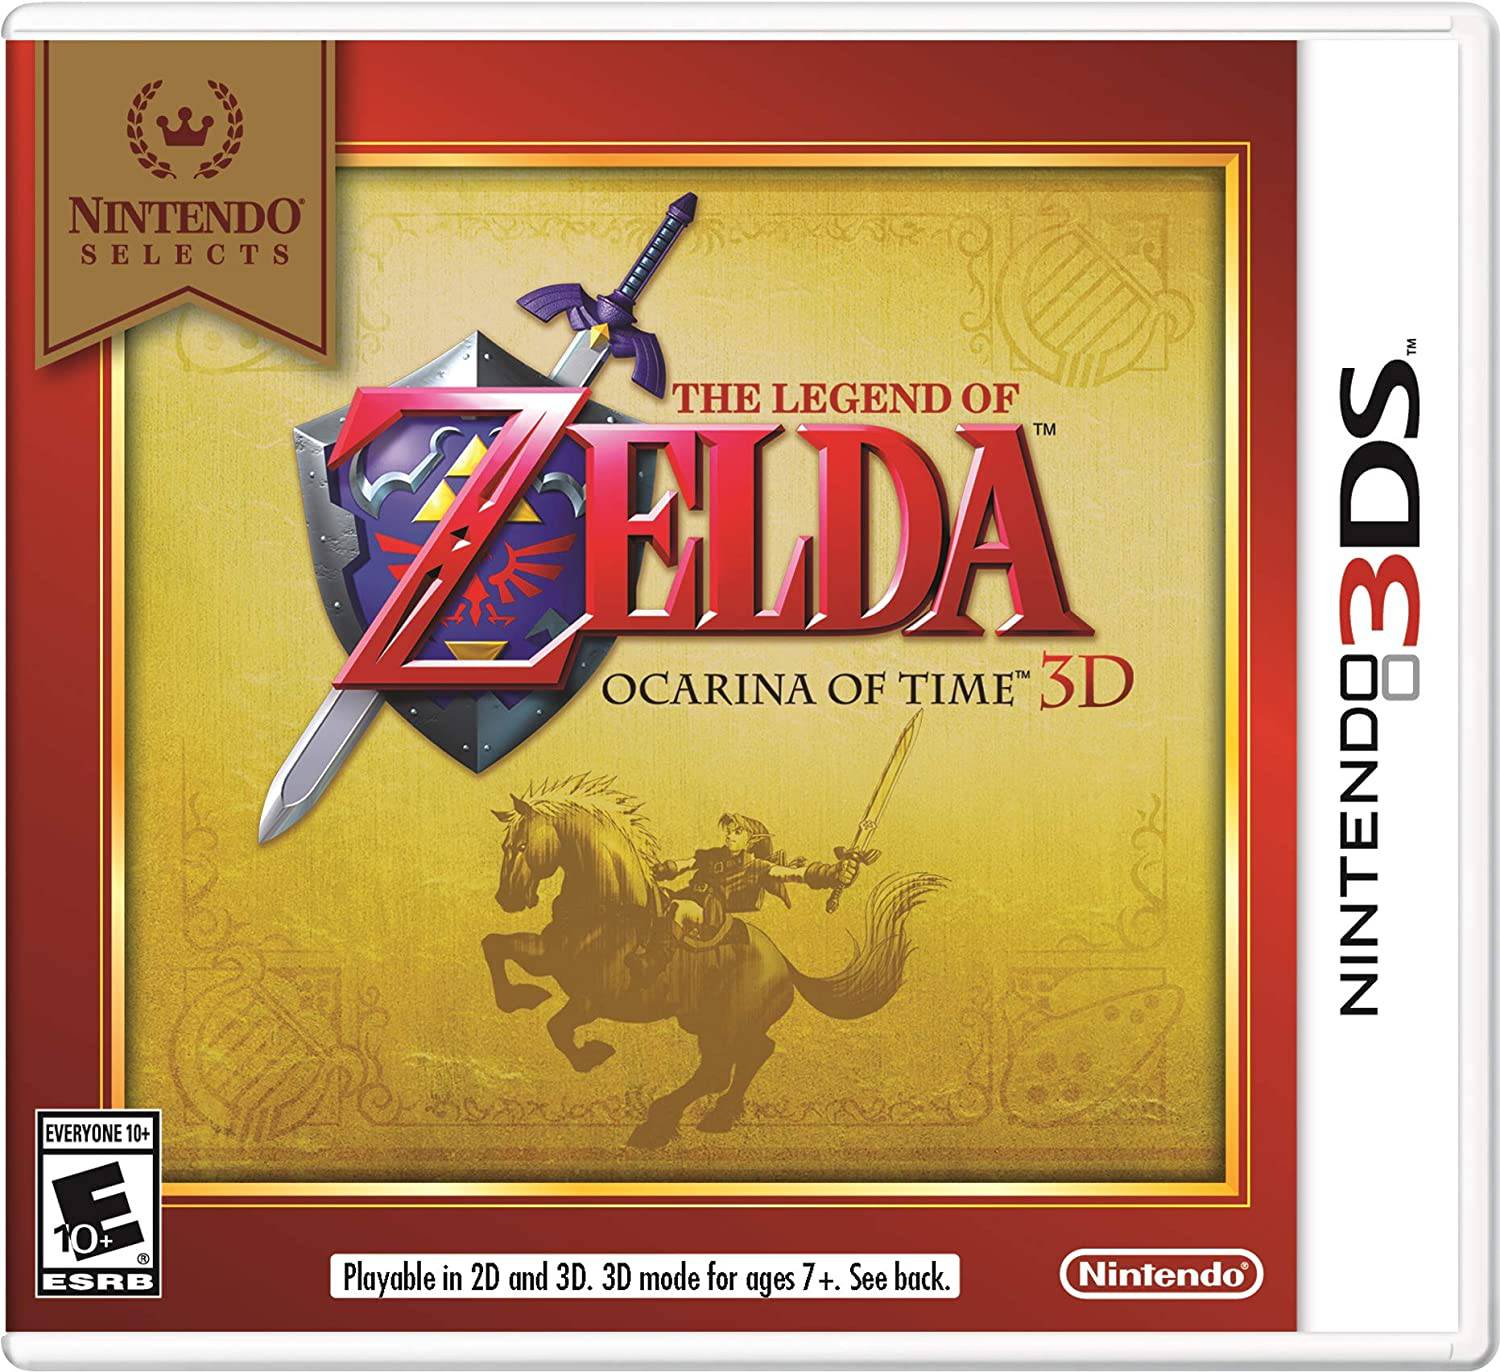 Nintendo Selects: The Legend of Zelda Ocarina of Time 3D - Nintendo 3DS King Gaming